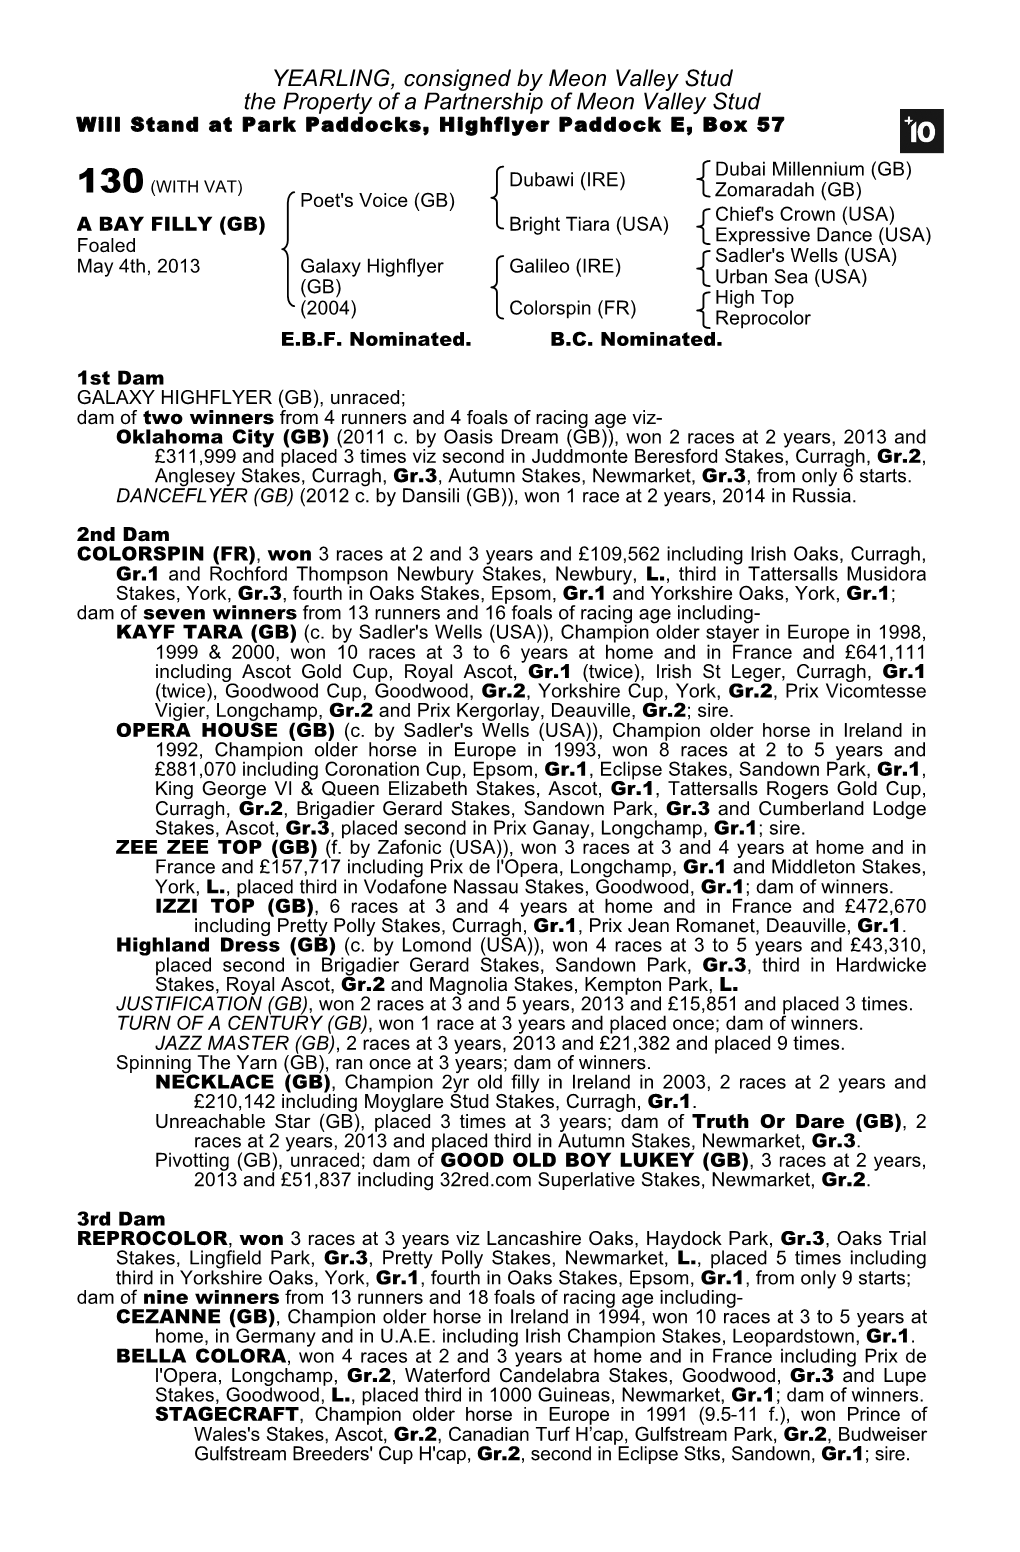 YEARLING, Consigned by Meon Valley Stud the Property of a Partnership of Meon Valley Stud Will Stand at Park Paddocks, Highflyer Paddock E, Box 57